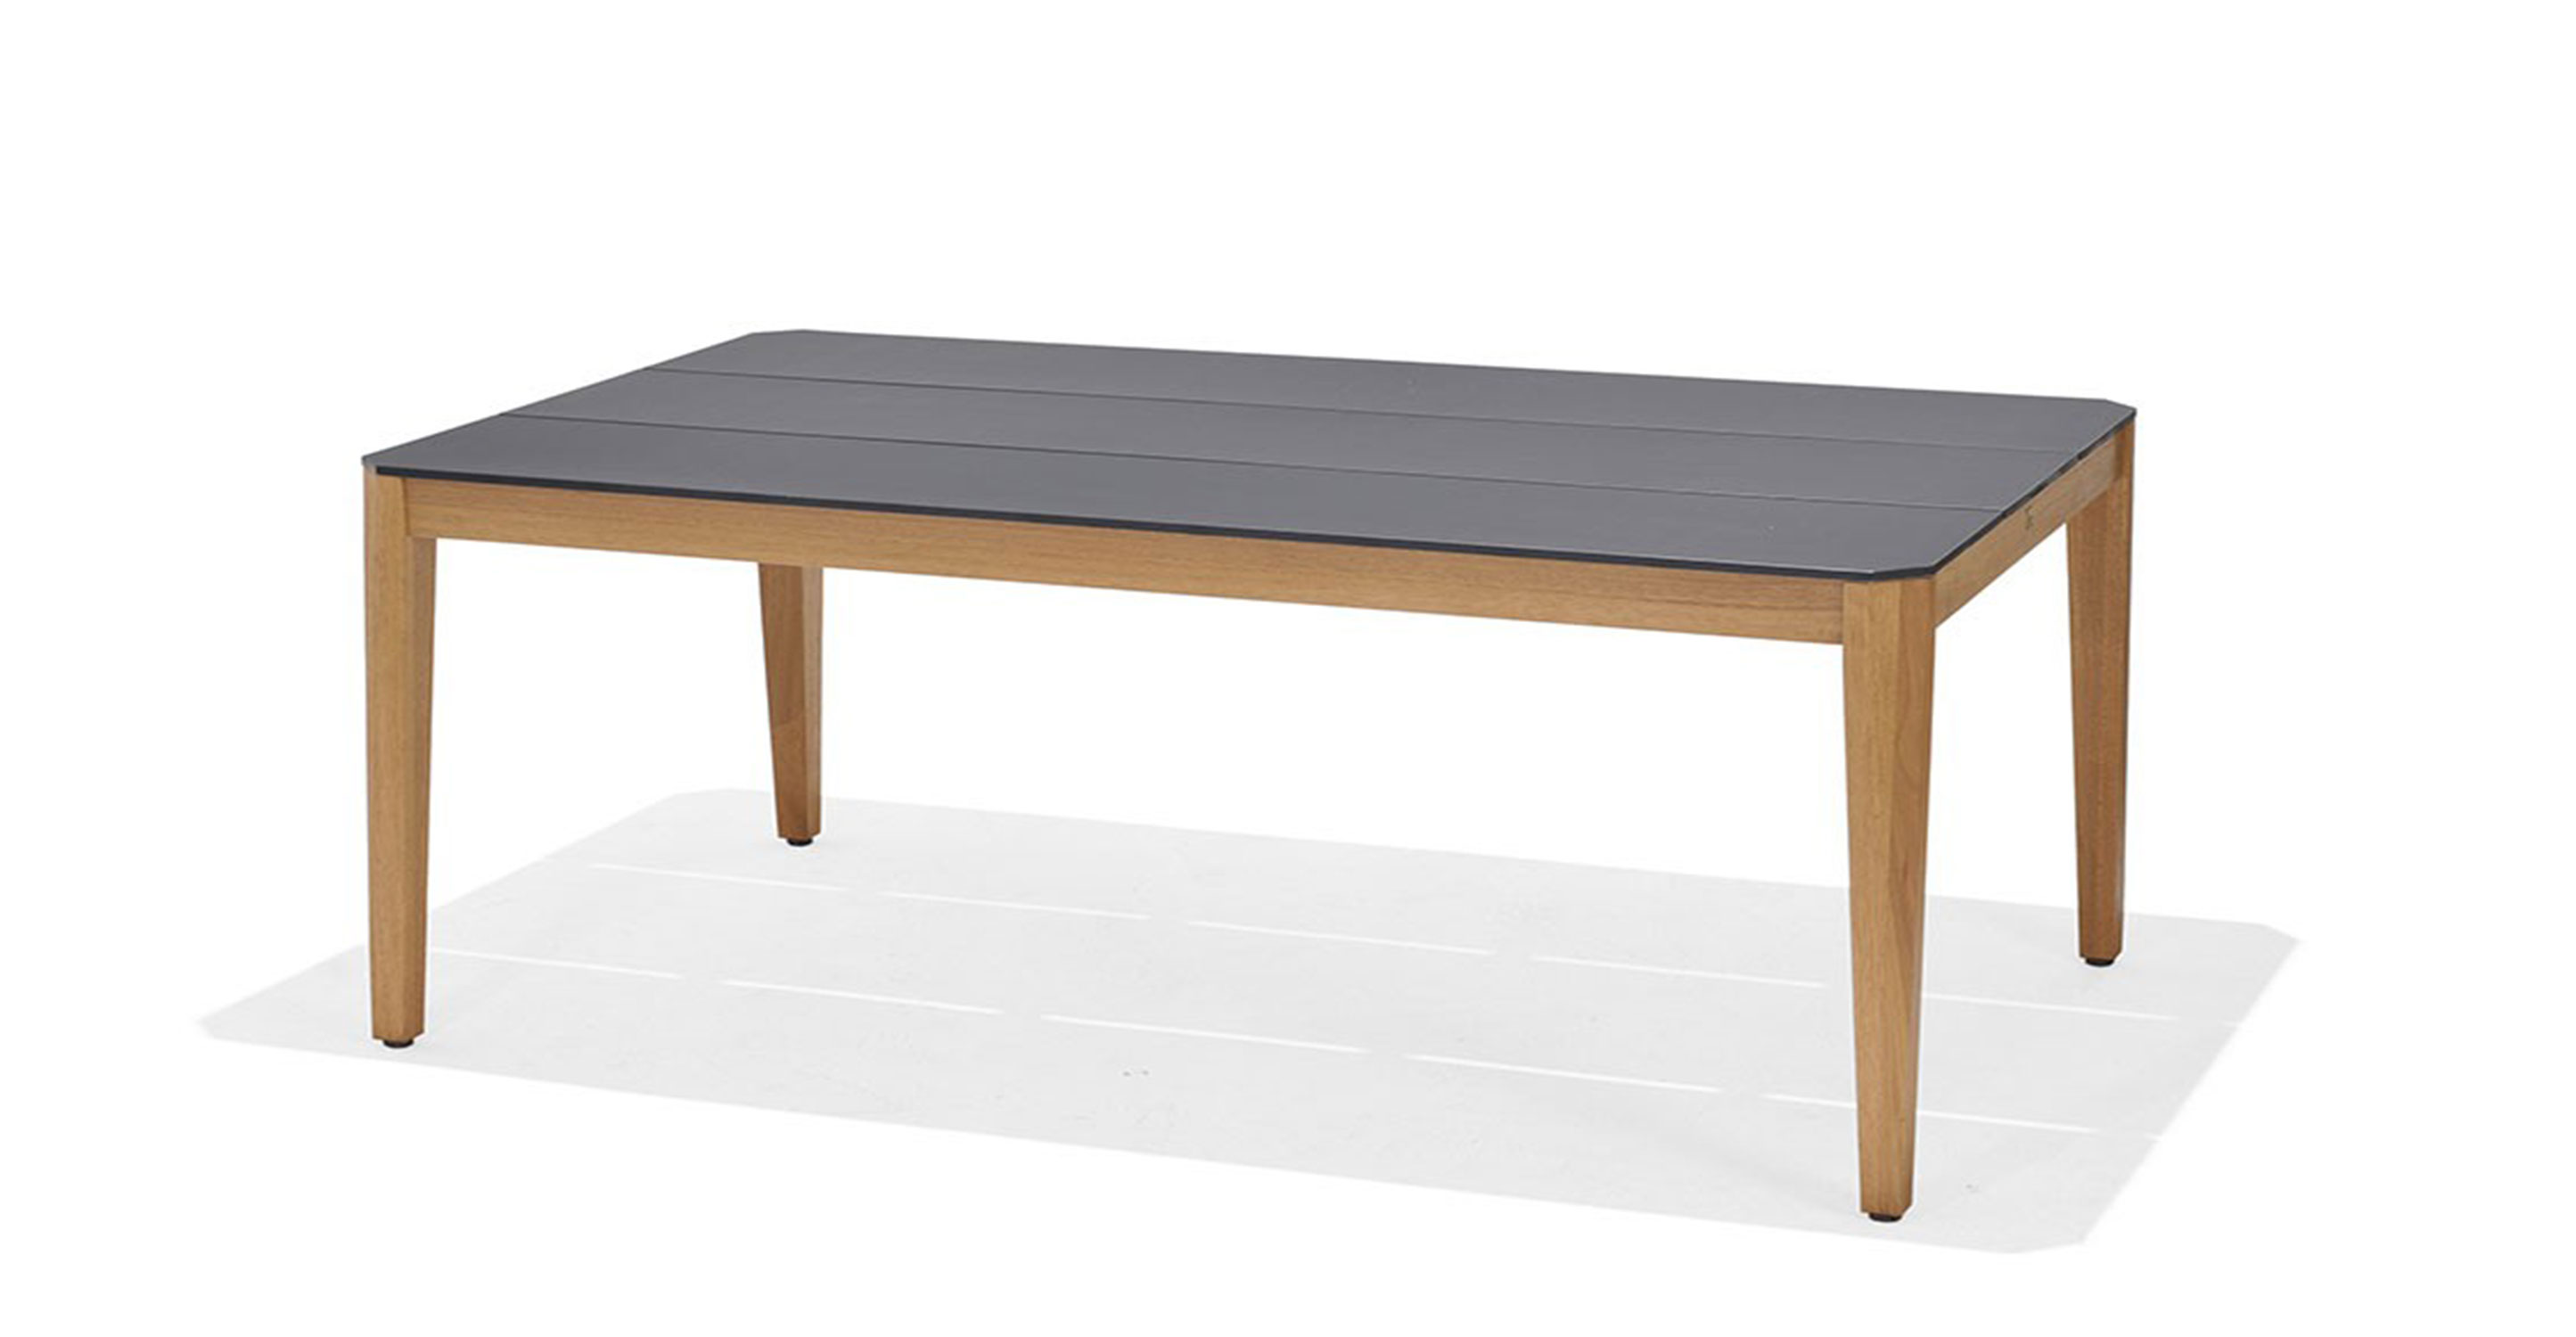 Select dining table